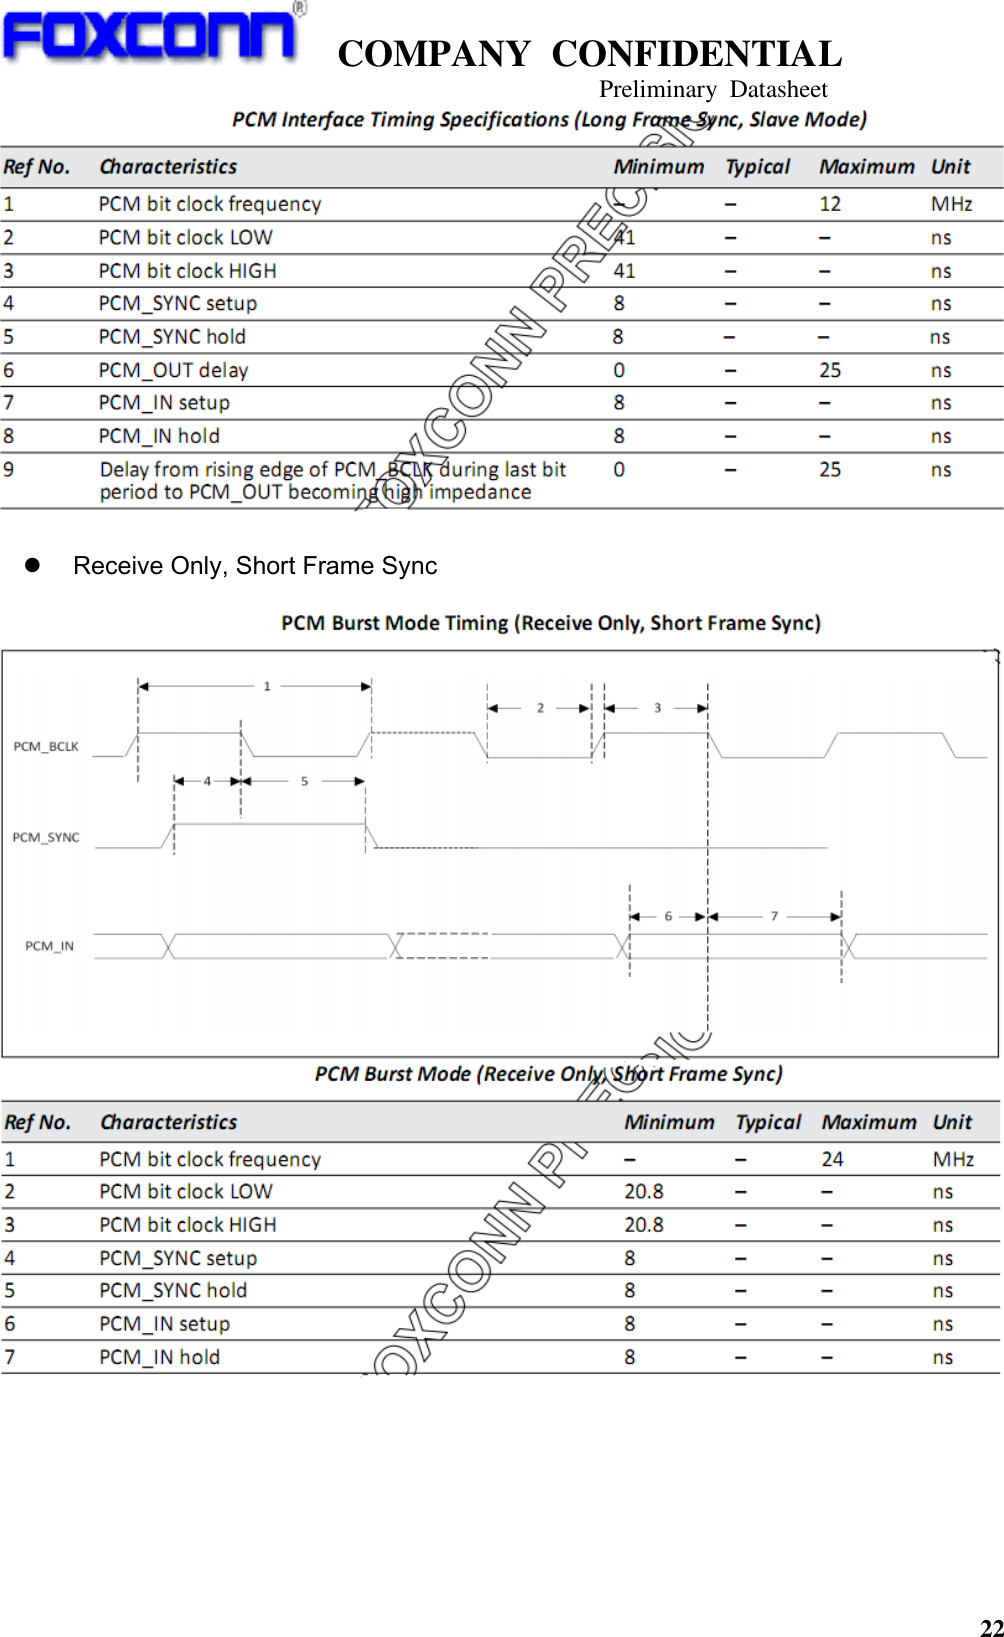   COMPANY  CONFIDENTIAL                                   Preliminary  Datasheet 22     Receive Only, Short Frame Sync          